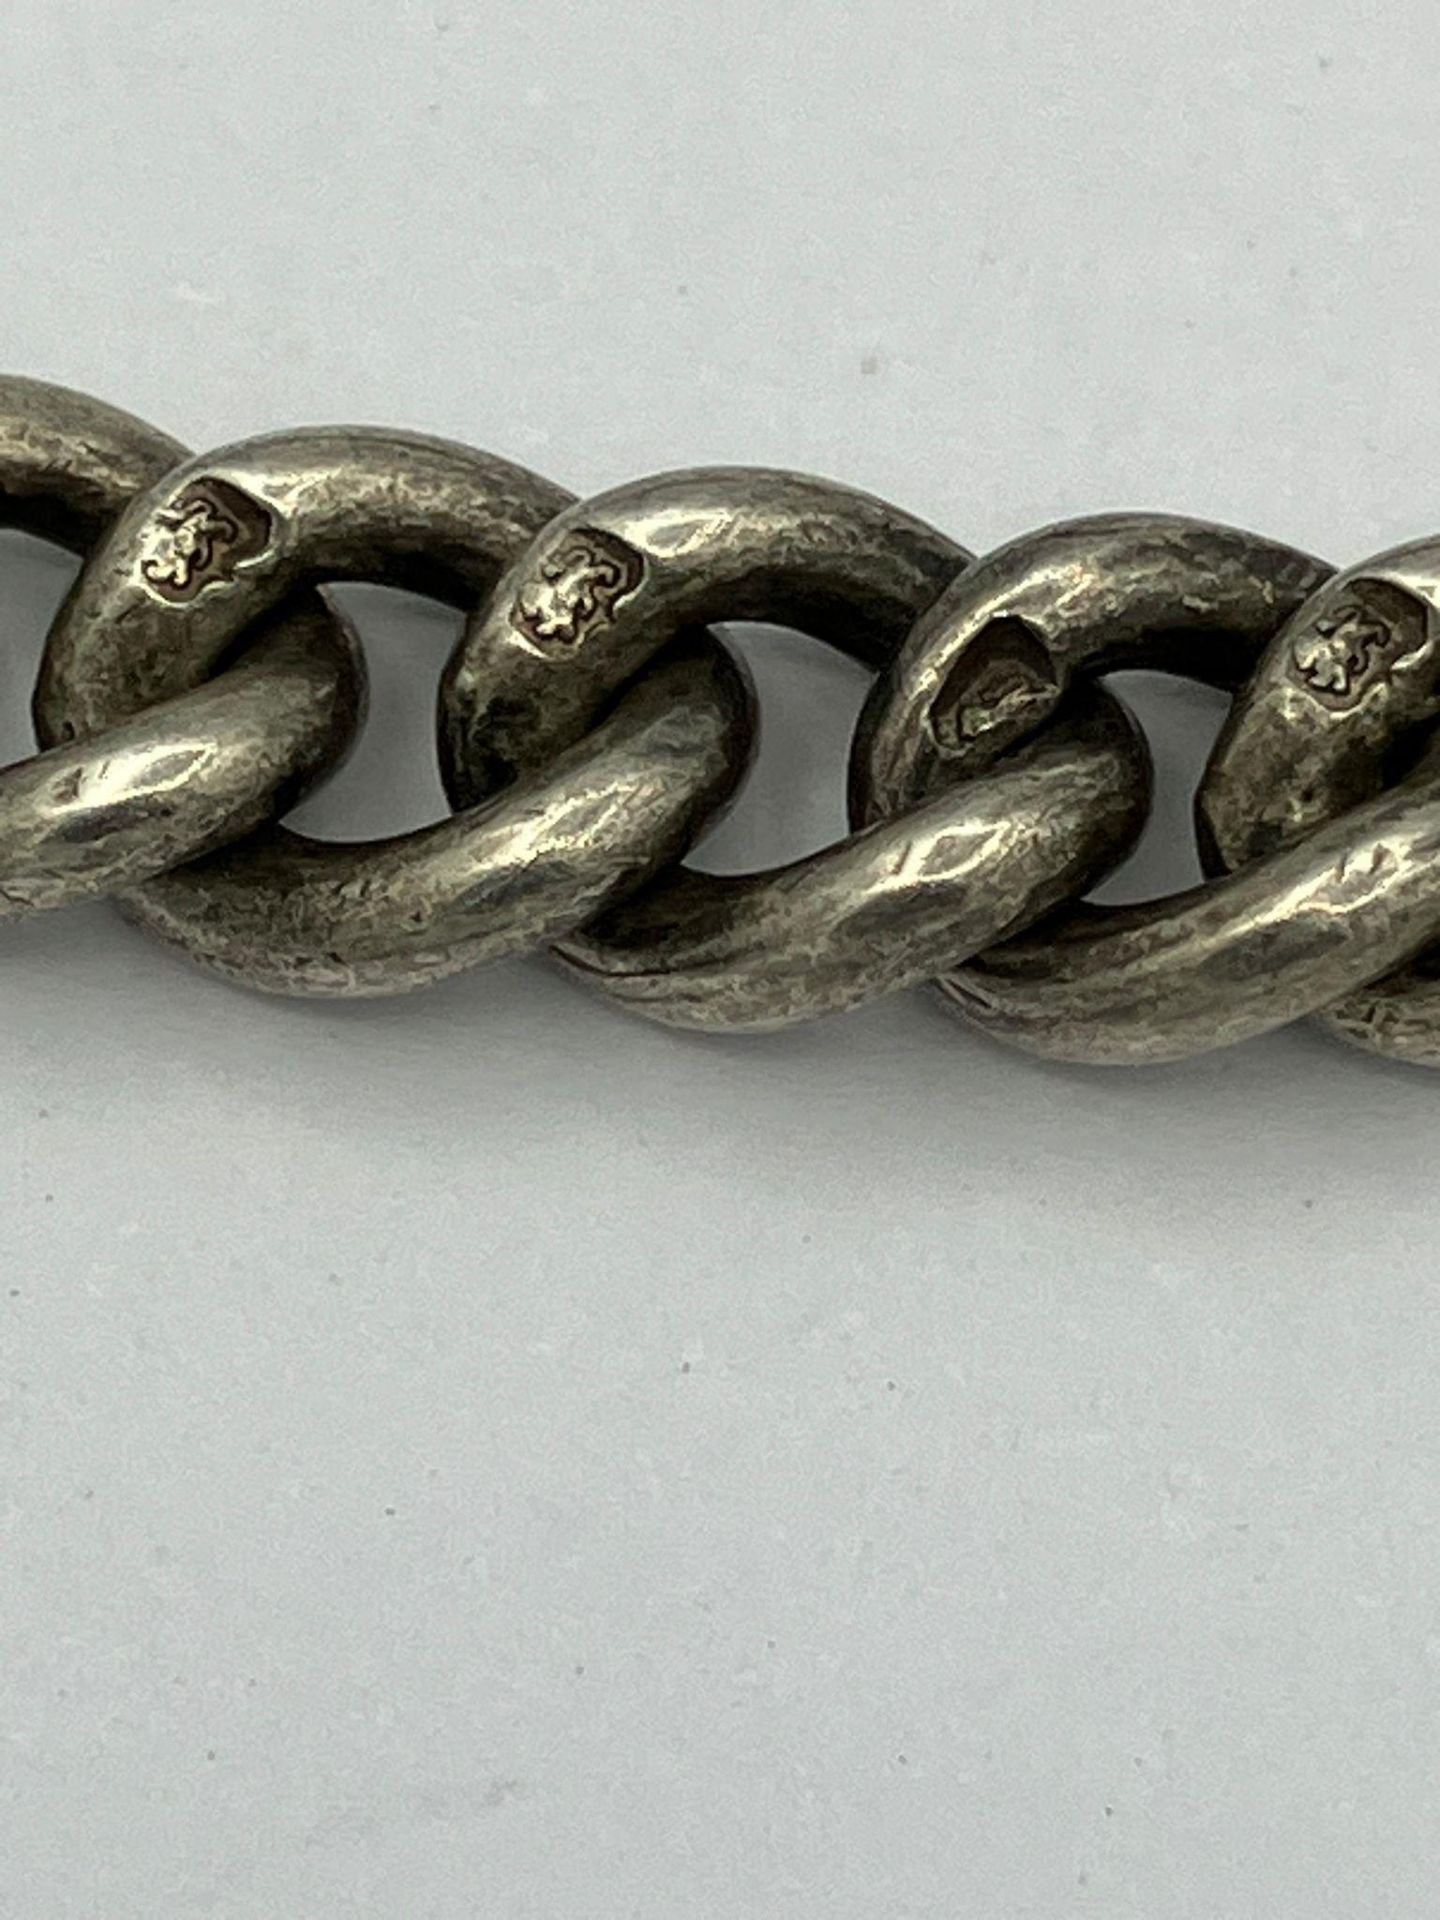 Antique SILVER WATCH CHAIN 1912 With full Hallmark on T Bar and every link individually stamped - Bild 3 aus 4